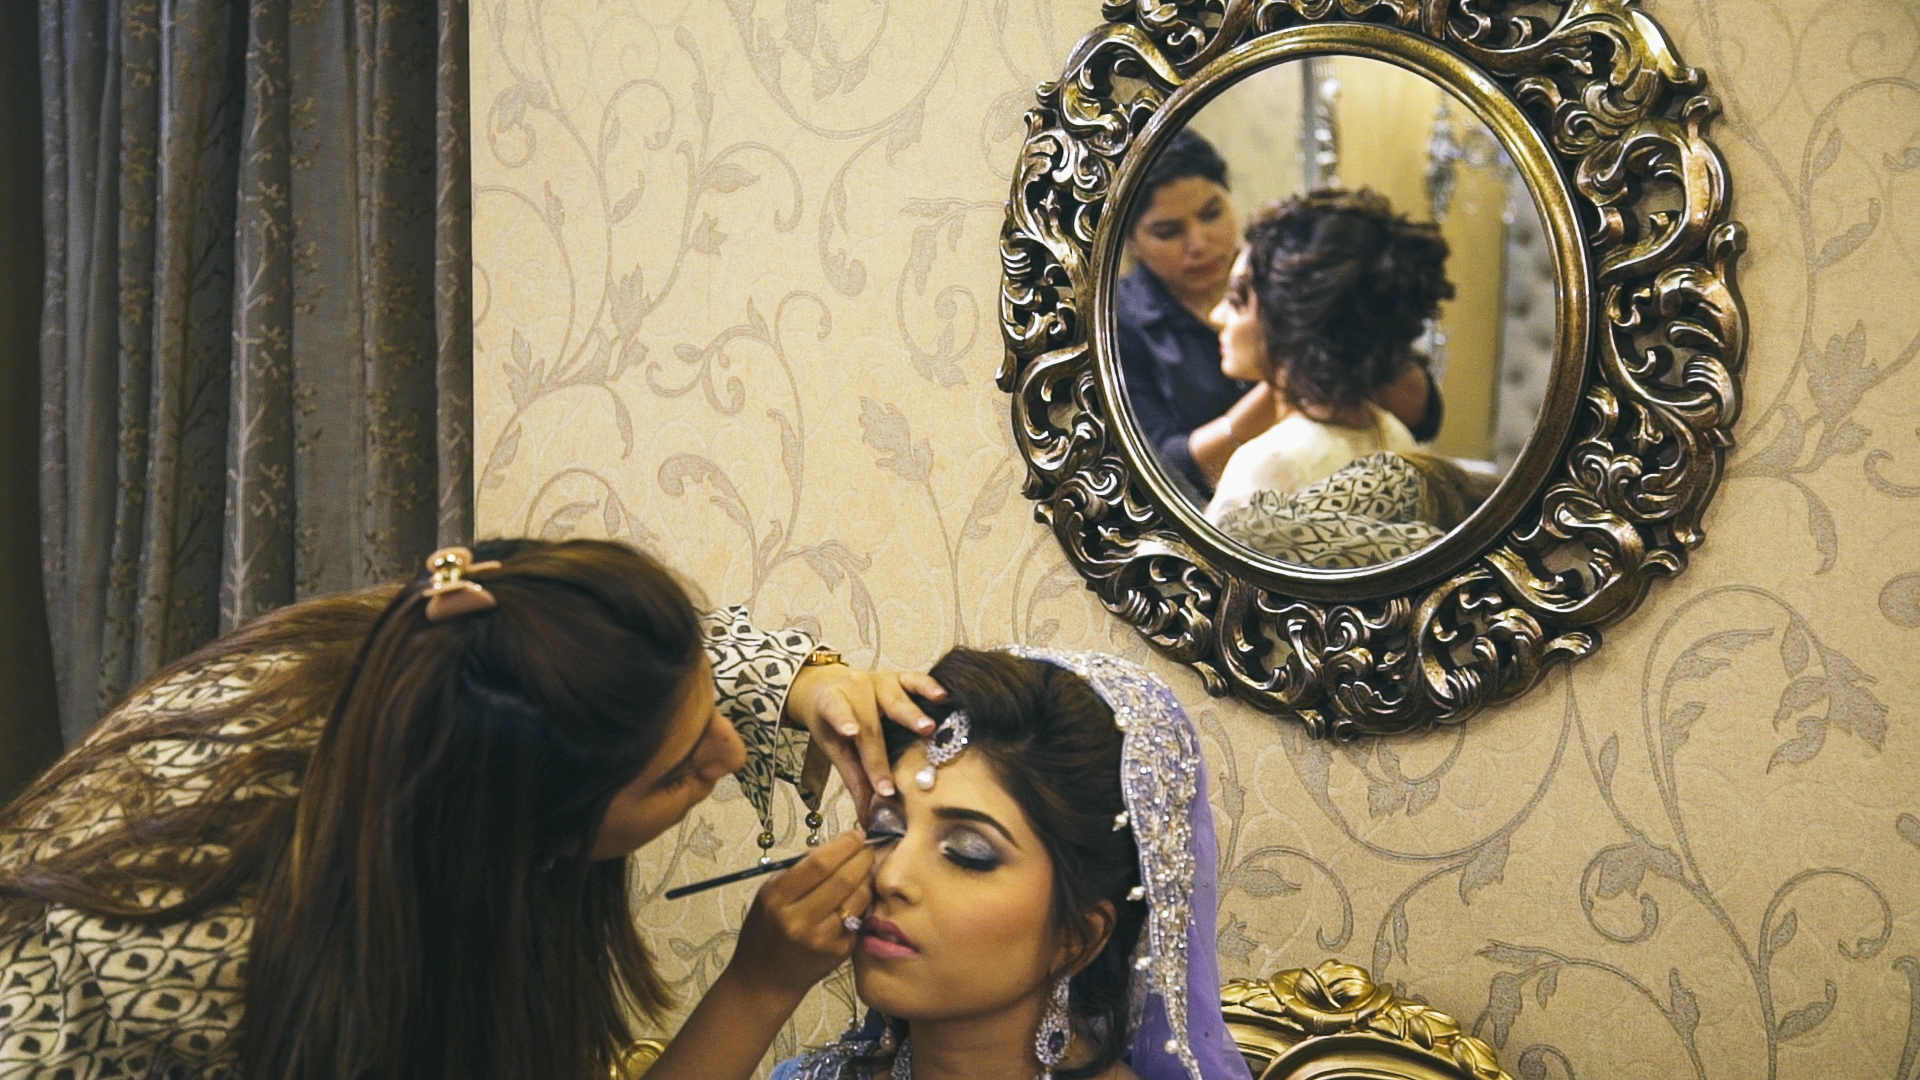  Newlyweds Ayesha and Farheen have their makeup done in advance of Sadaf's final wedding ceremony, the  baraat . Even though this ceremony is for Sadaf, tradition dictates that new brides dress nicely for a month after their wedding. All three brides